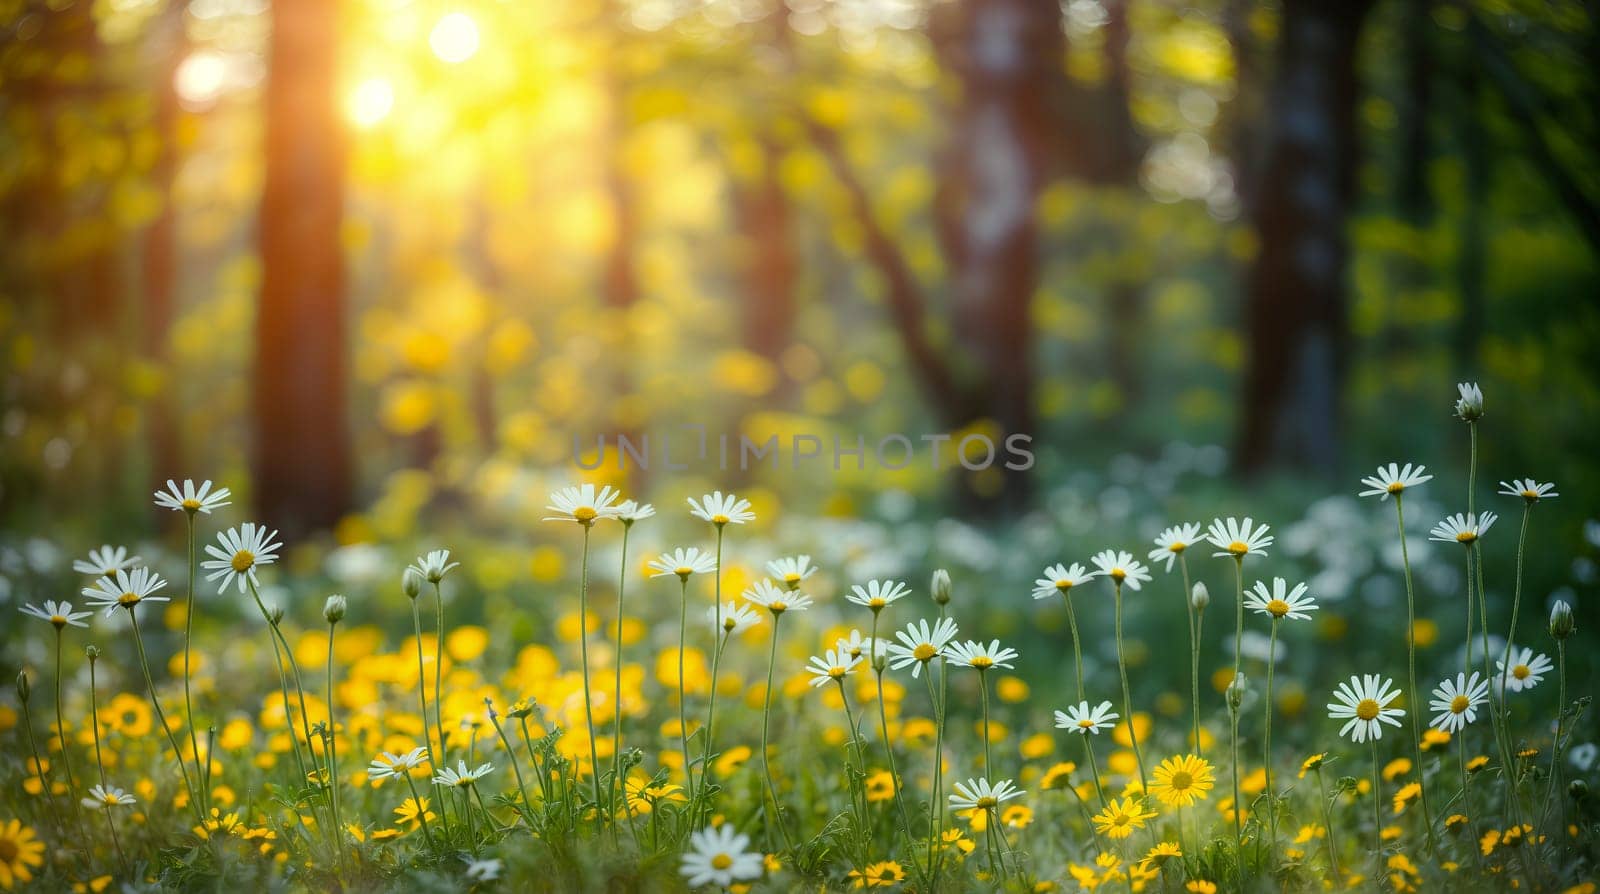 A Field of Daisies in the Sunlight by chrisroll